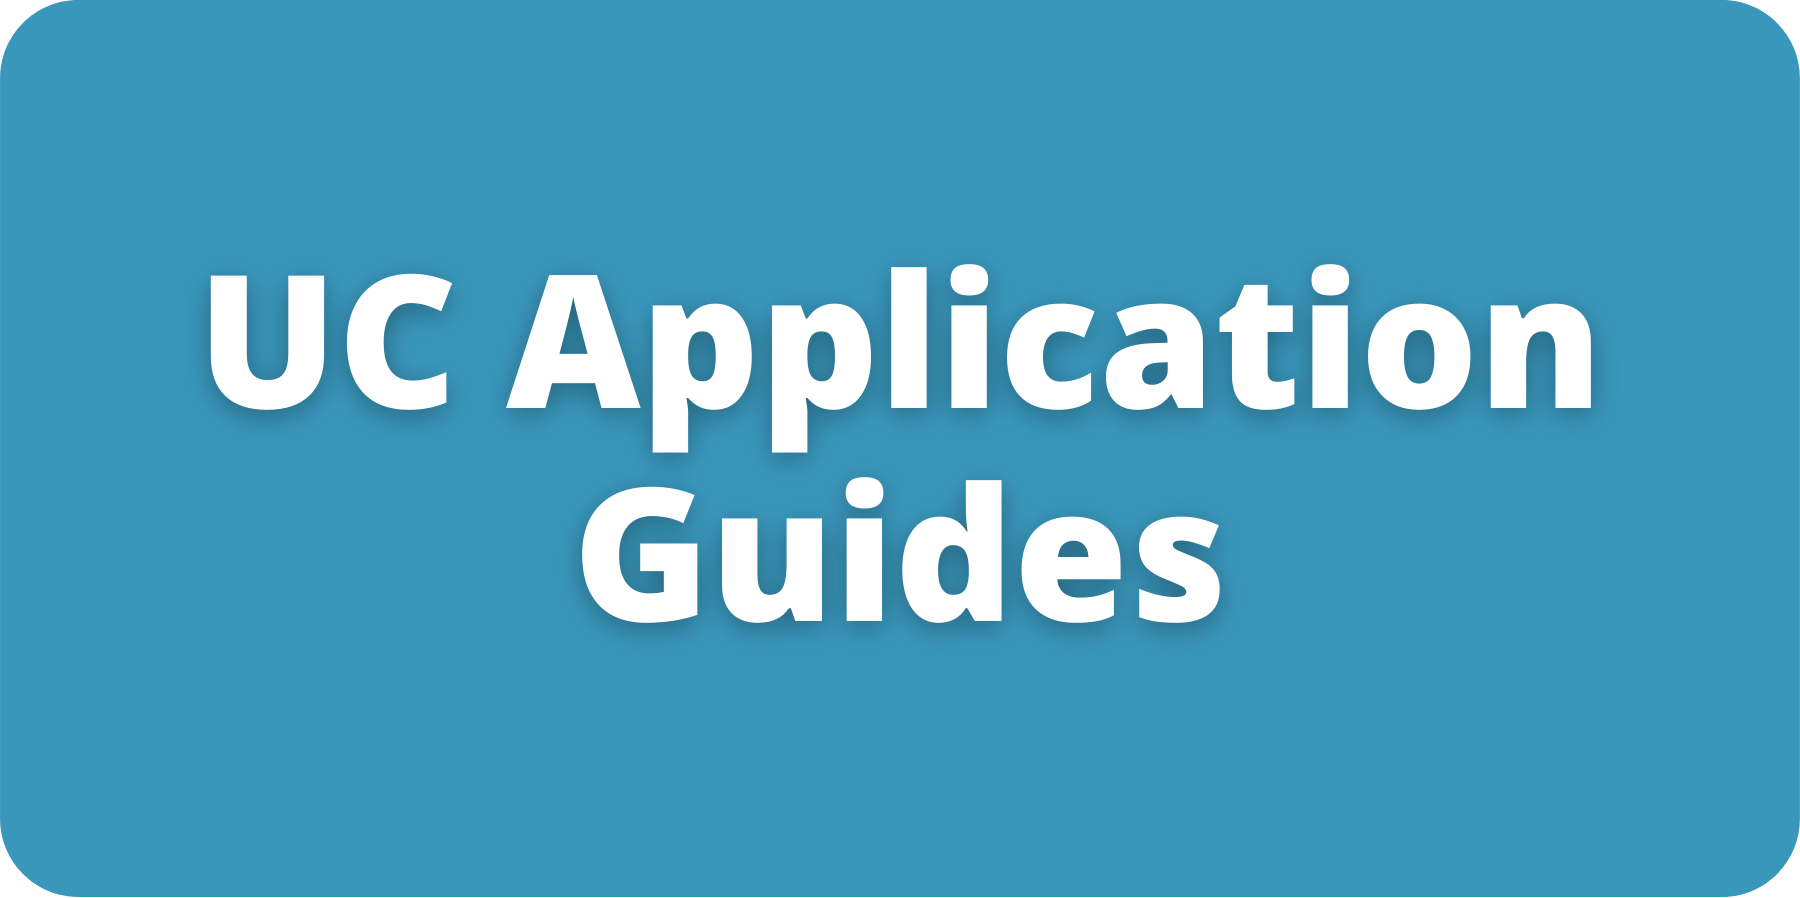 UC Application Guides